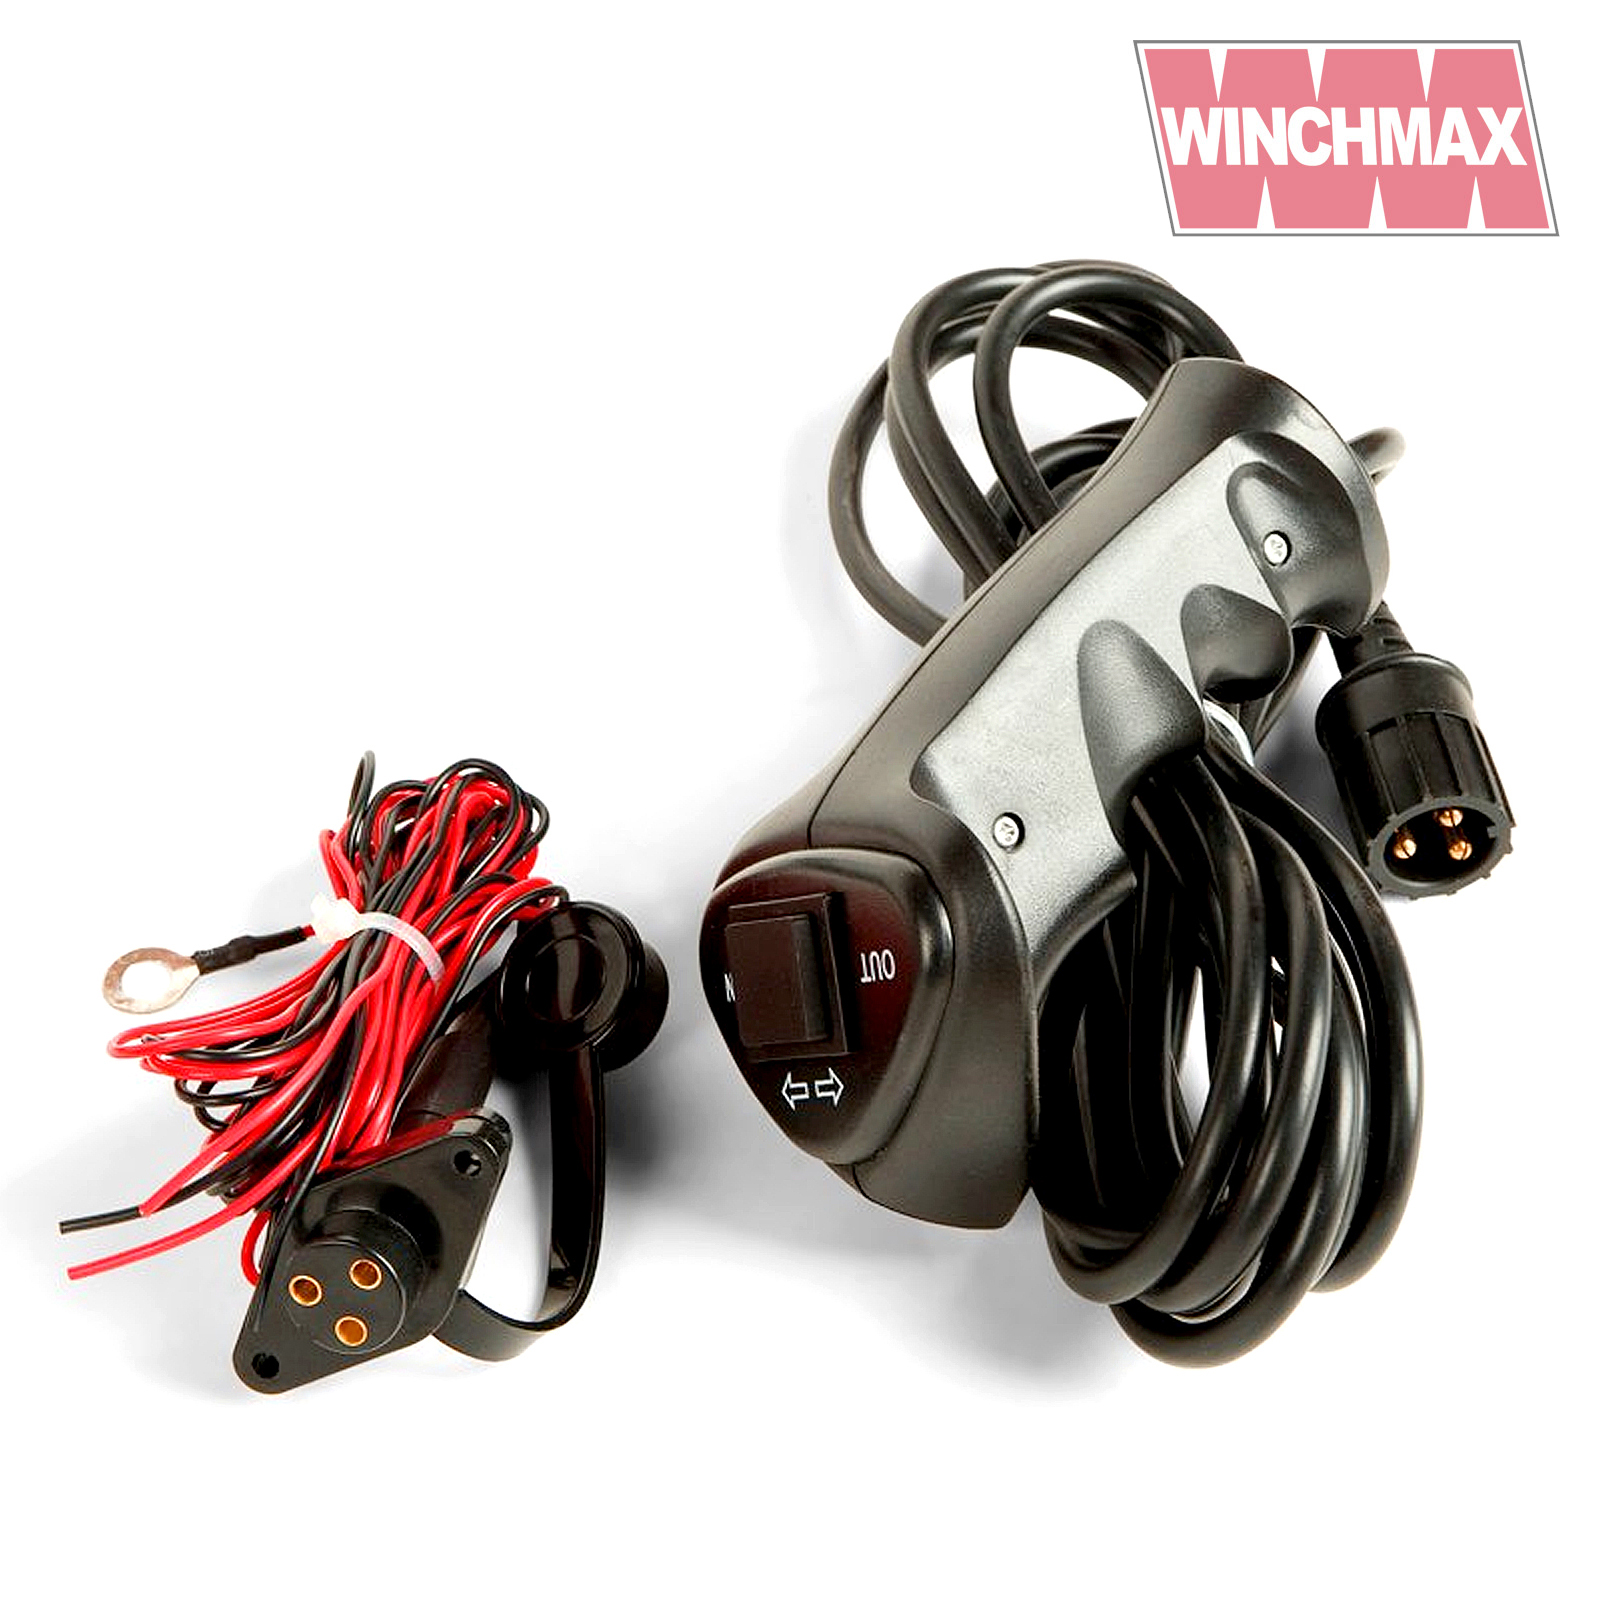 Winchmax Wired control